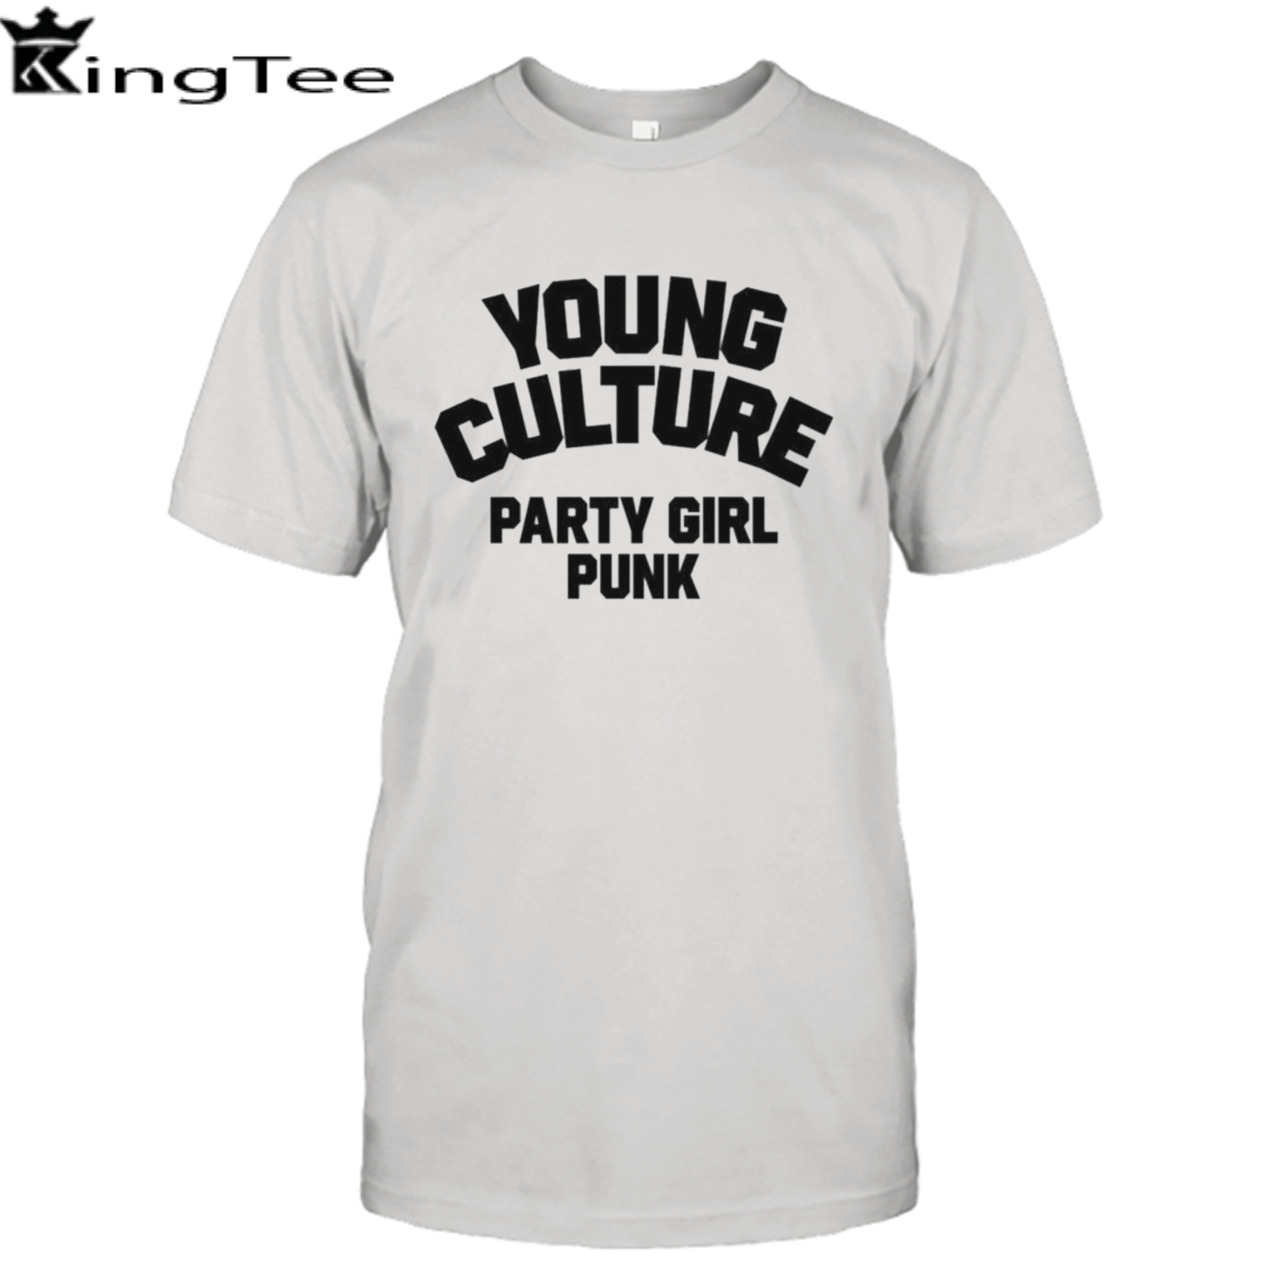 Young culture party girl punk shirt